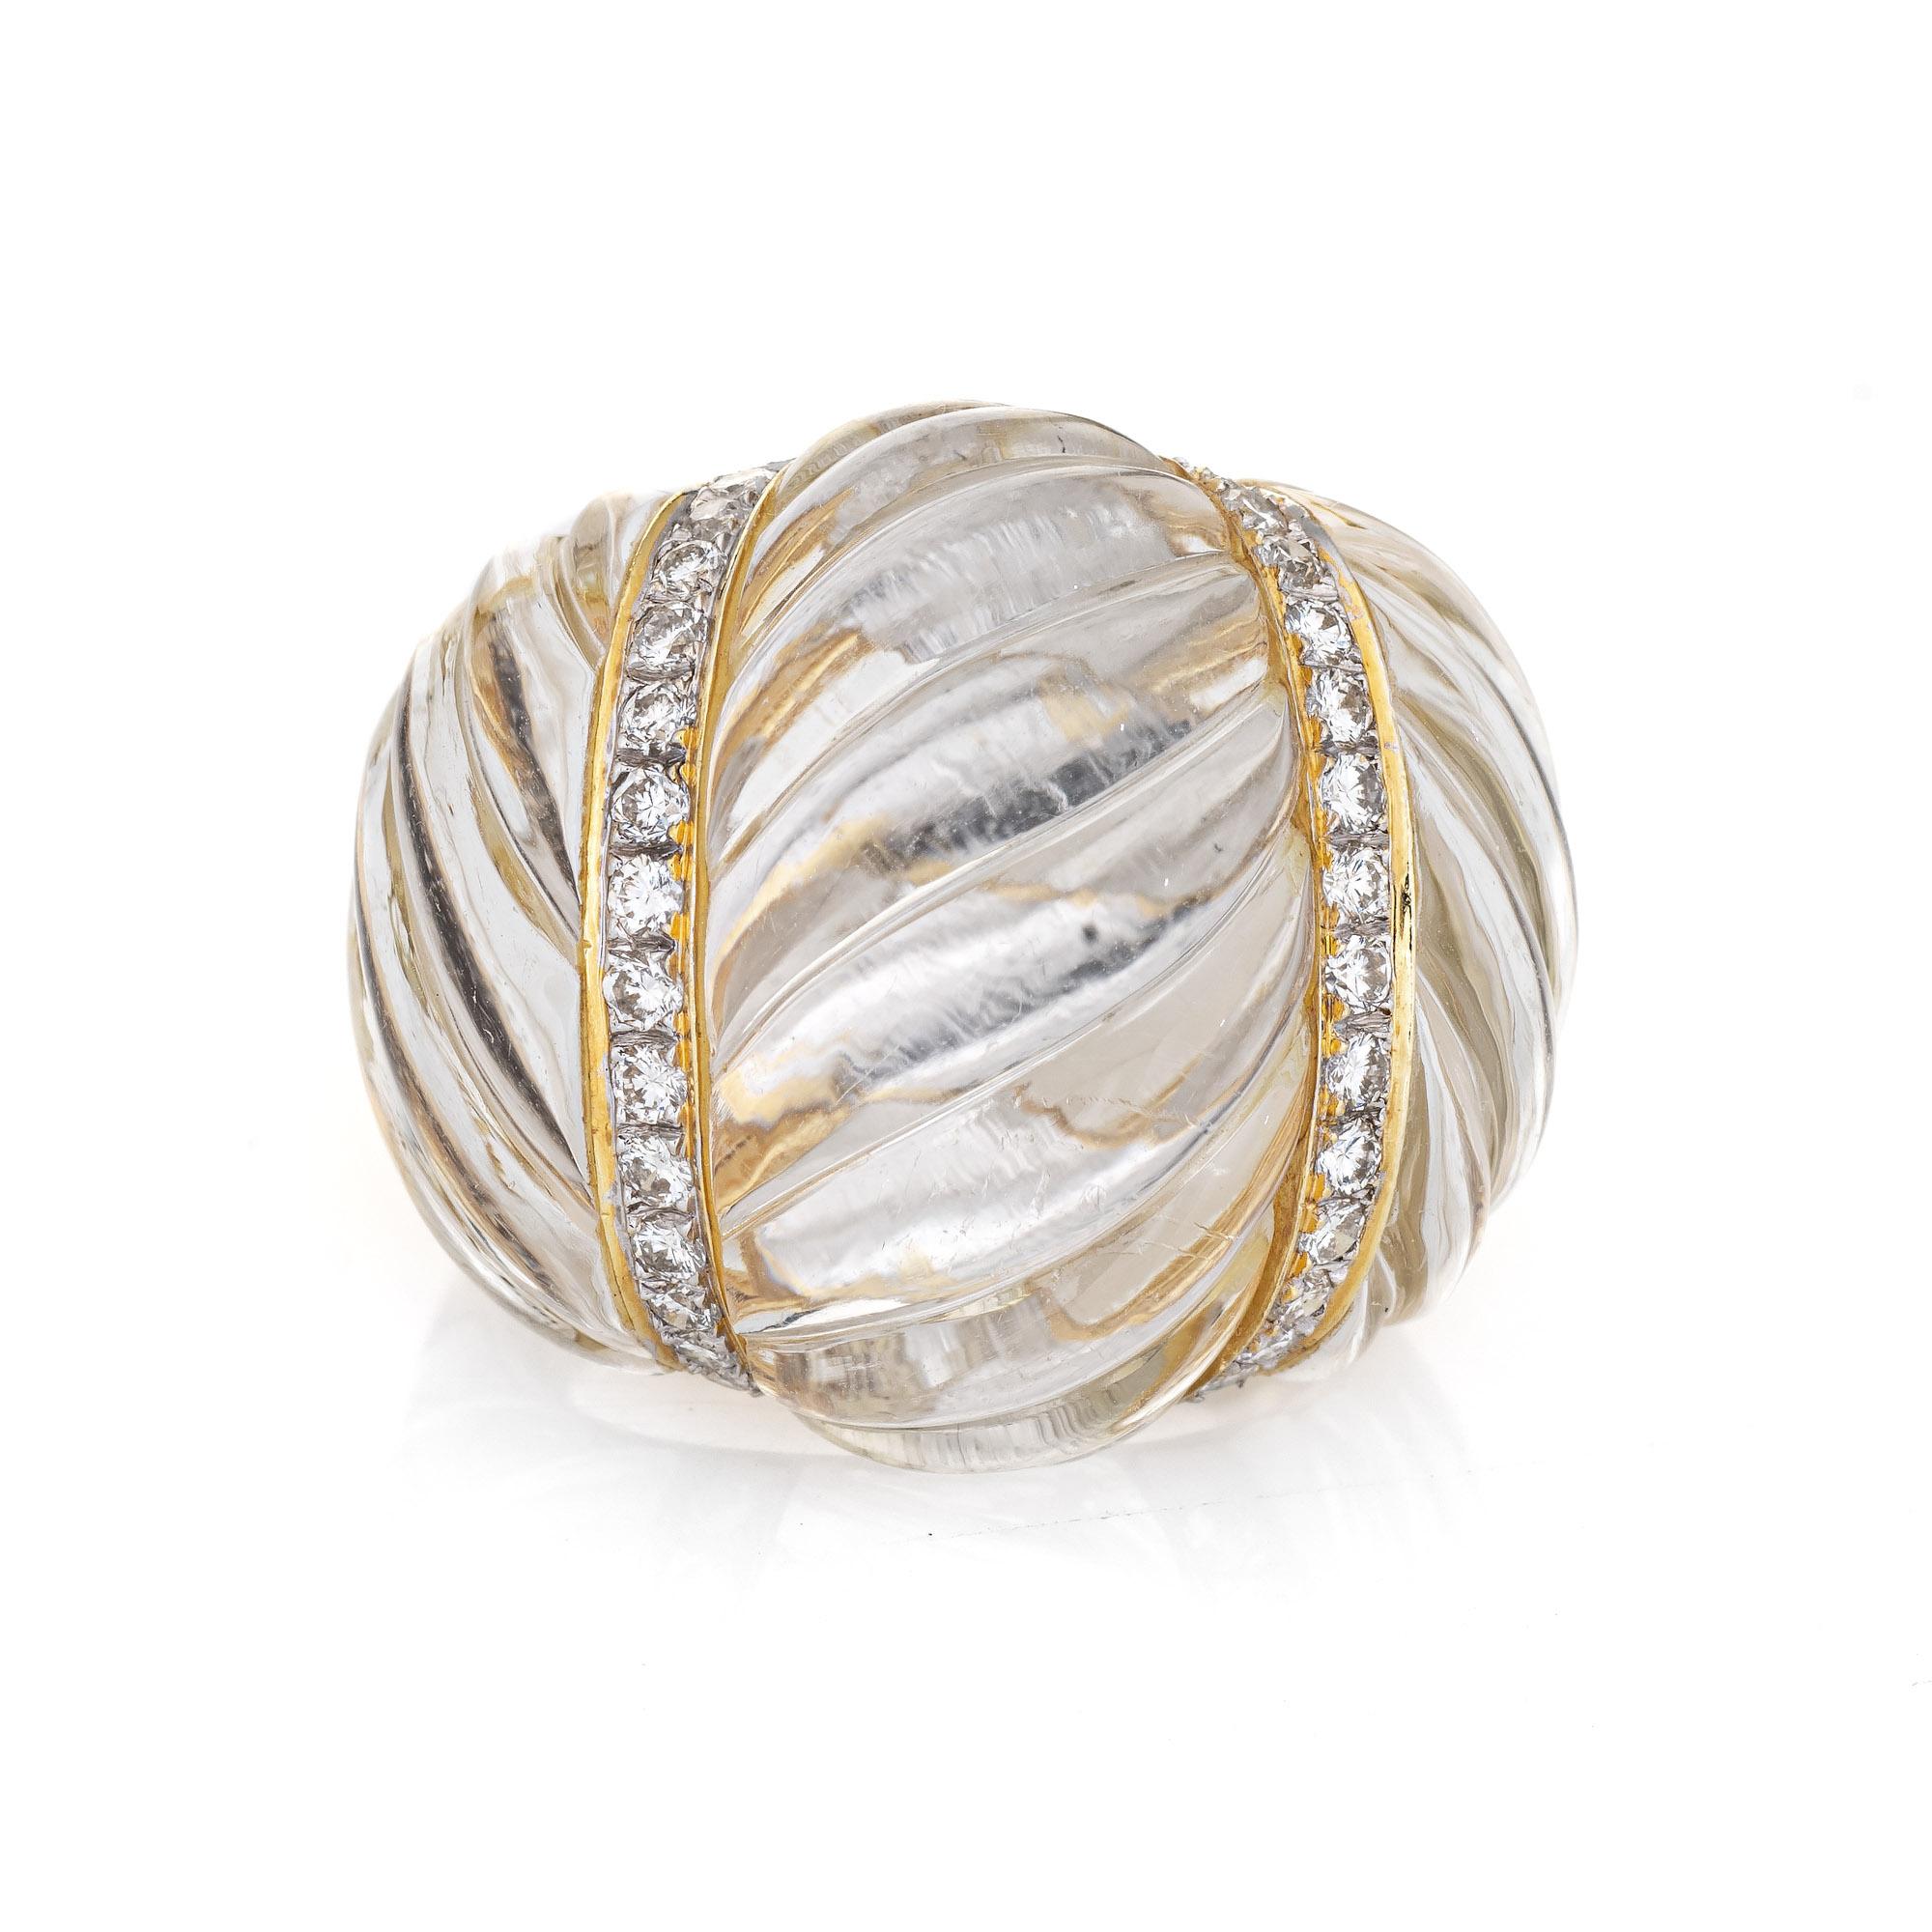 Bold & distinct vintage cocktail ring (circa 1960s to 1970s), crafted in 18 karat yellow gold. 

Fluted rock crystal measures 23mm x 27mm, accented with an estimated 0.28 carats of diamonds (estimated at H-I color and VS2-SI1 clarity). The rock